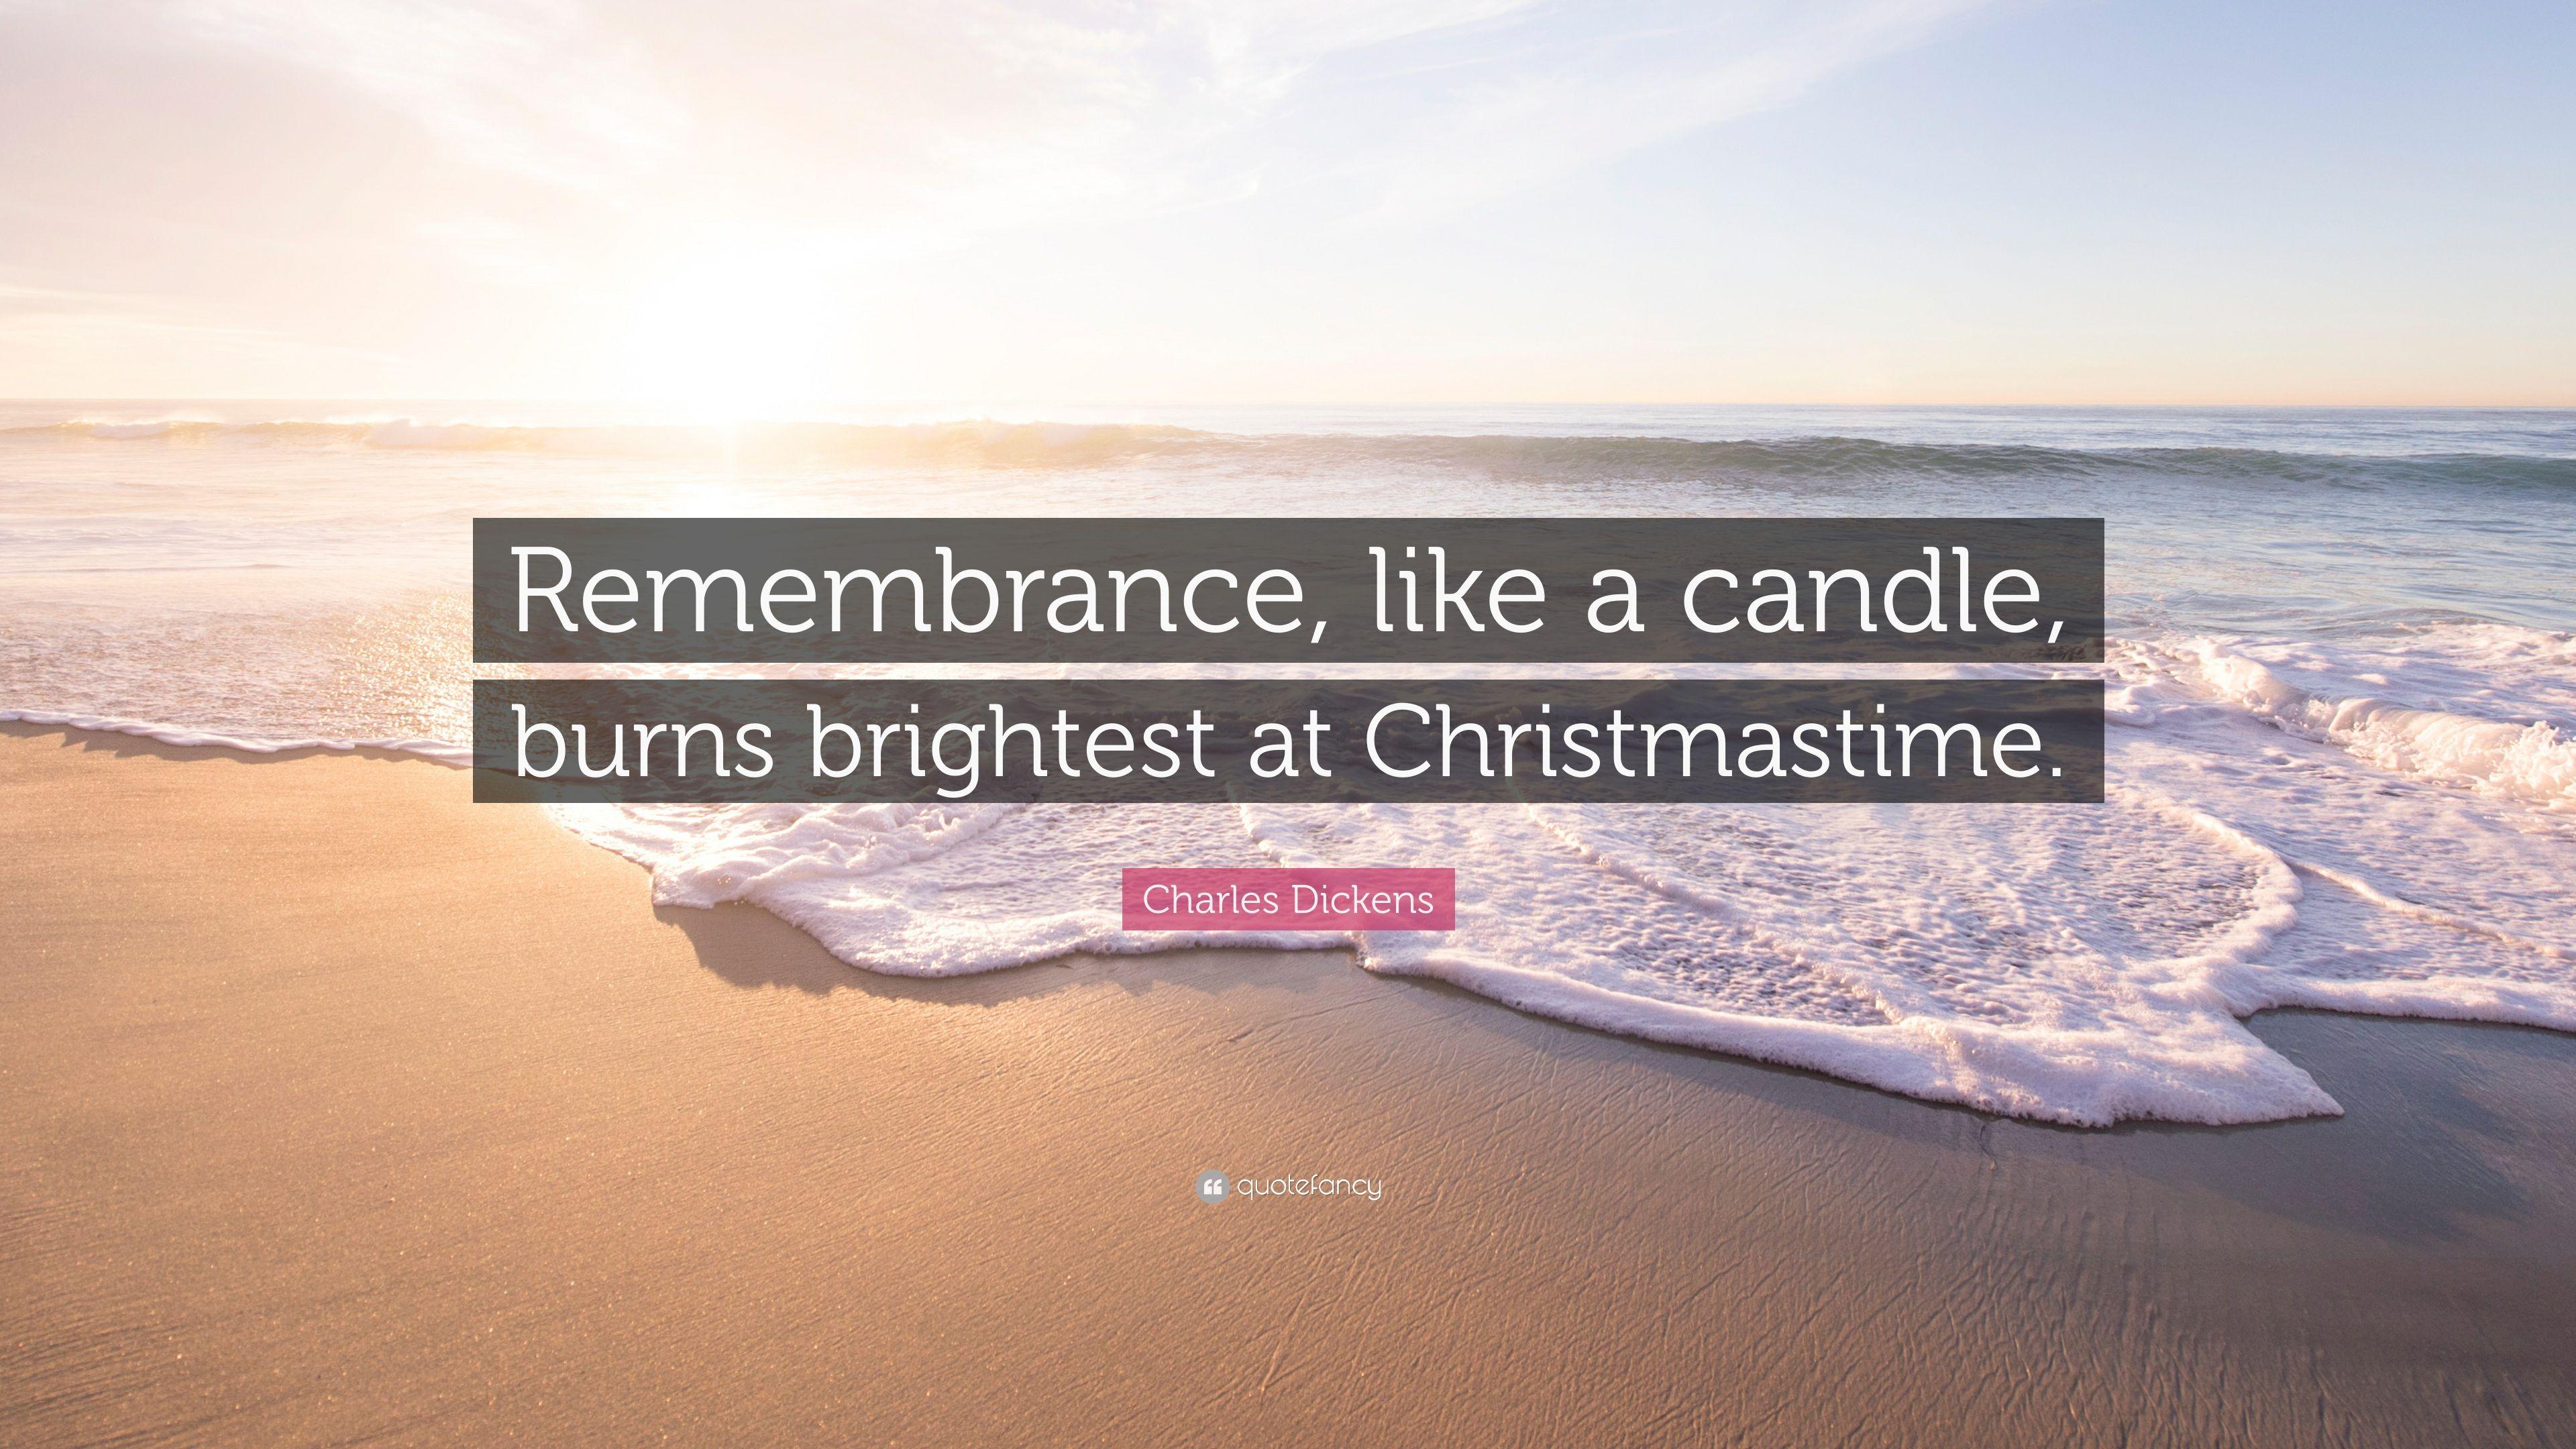 Charles Dickens Quote: “Remembrance, like a candle, burns brightest